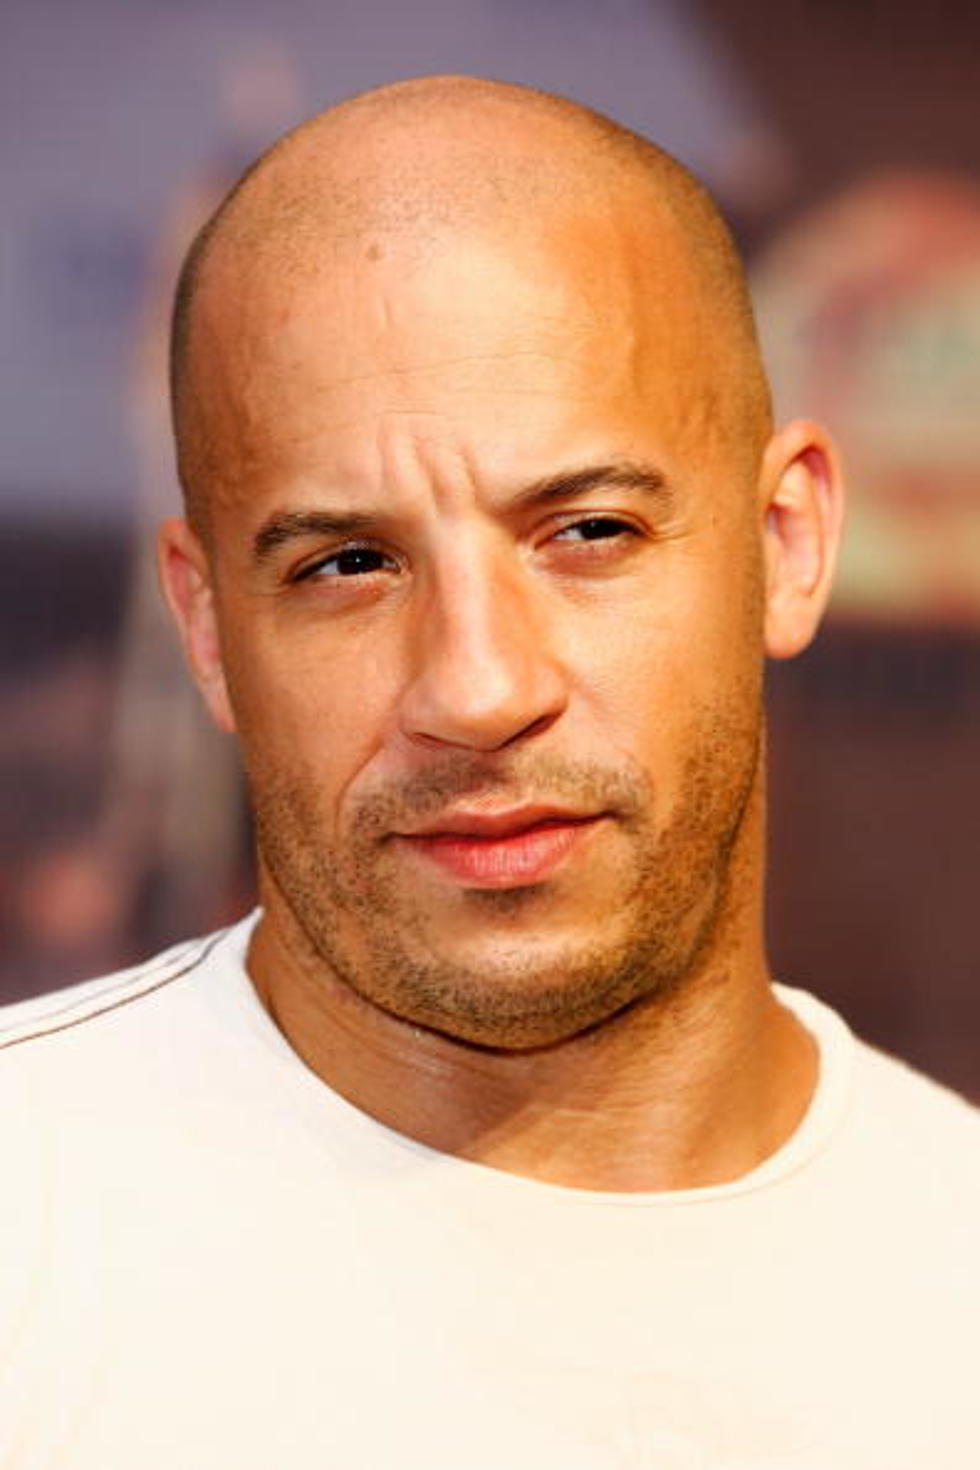 Celebrity Birthdays for Monday July 18 Includes Vin Diesel and James Brolin